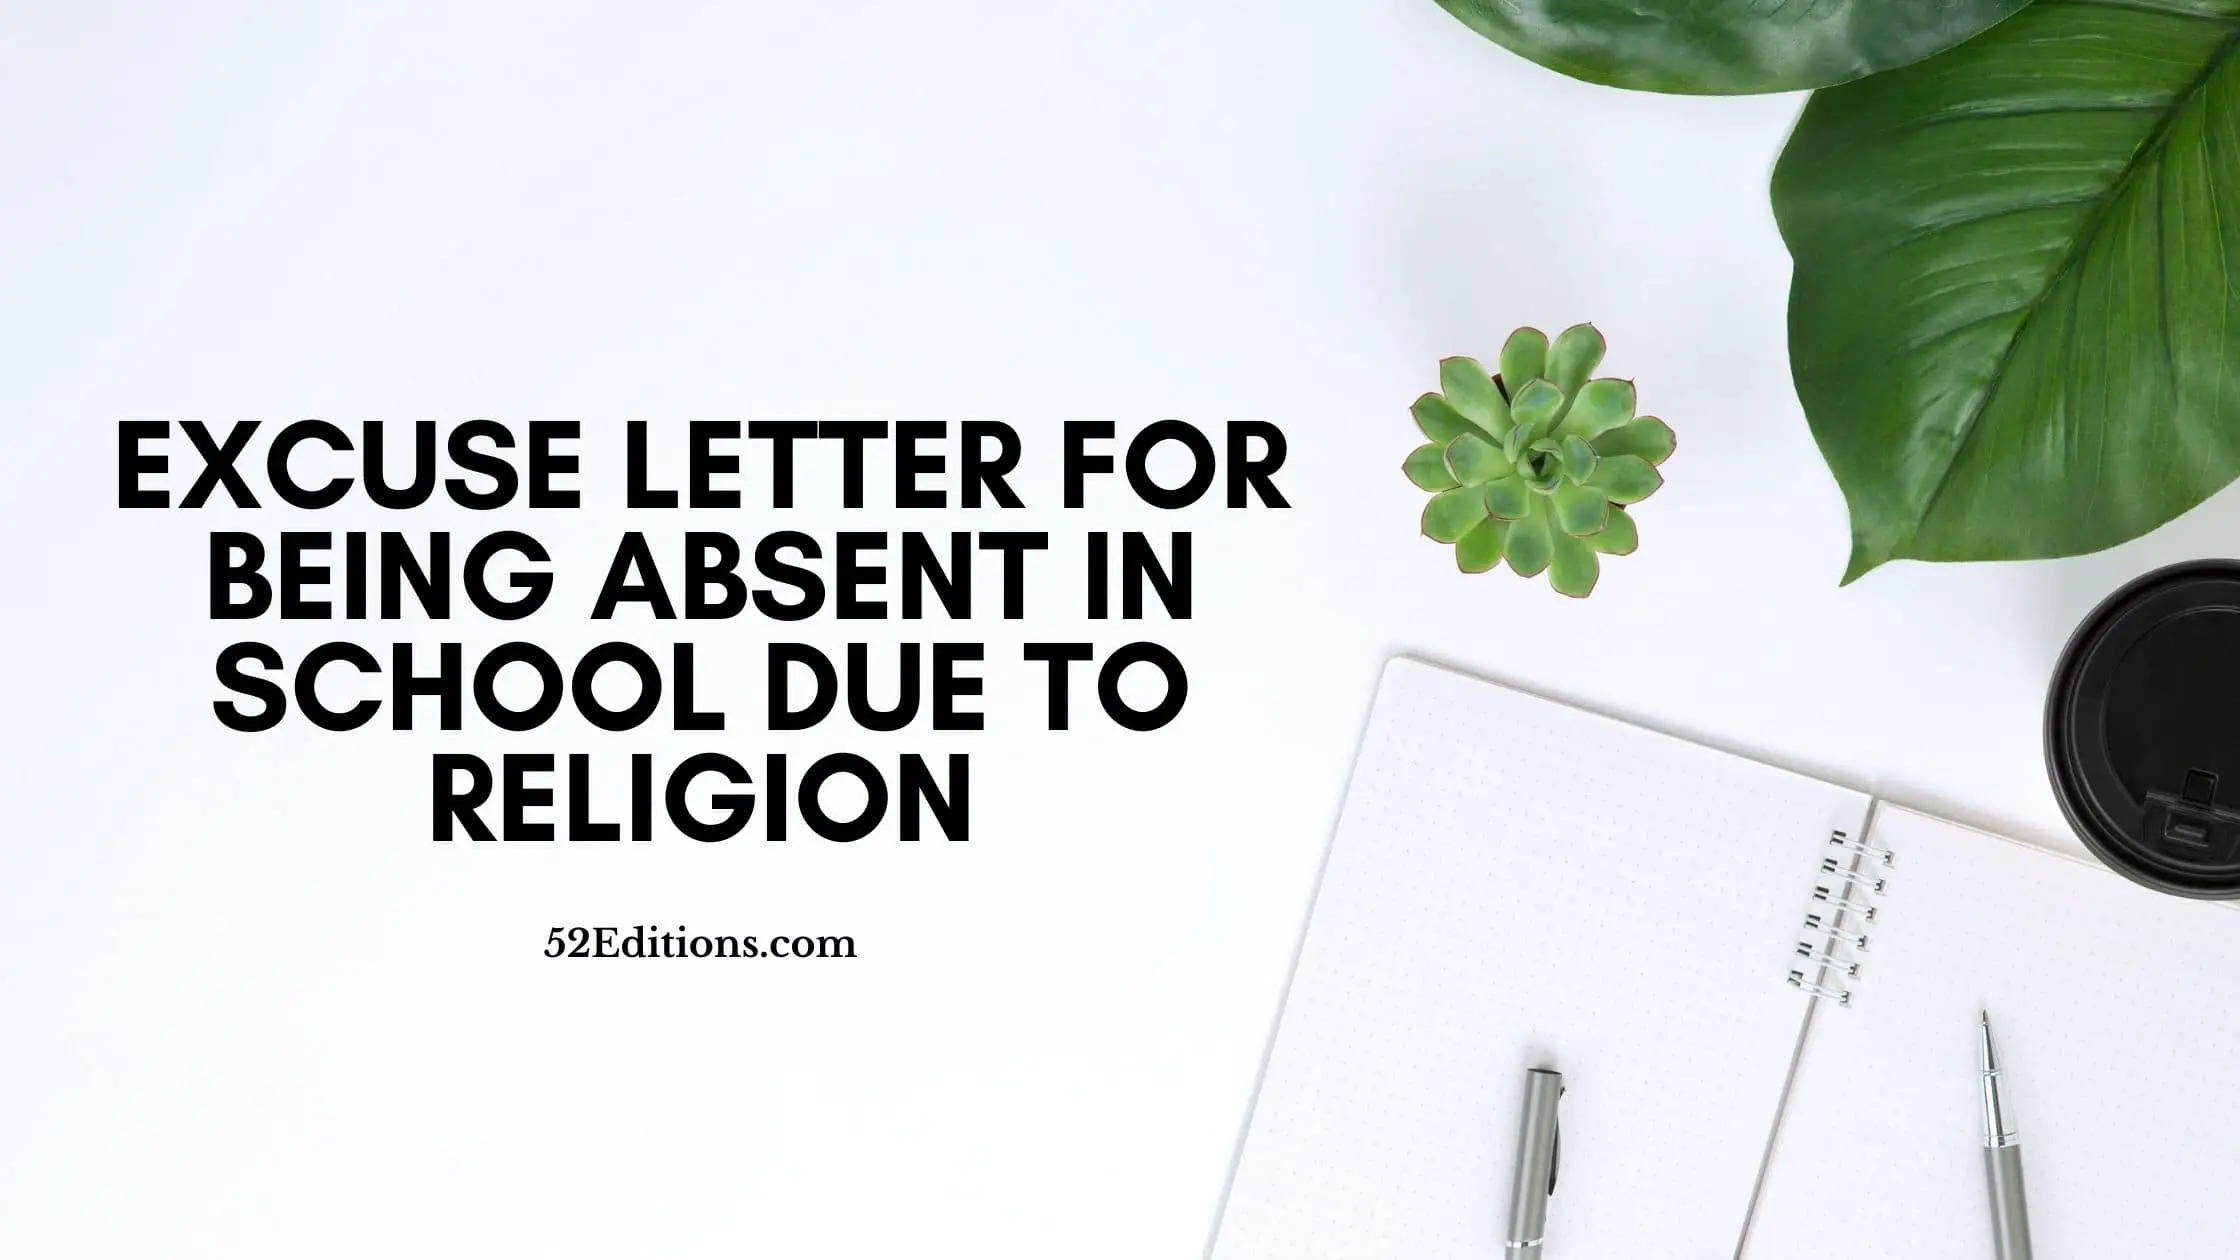 Excuse Letter For Being Absent In School Due To Religion // FREE